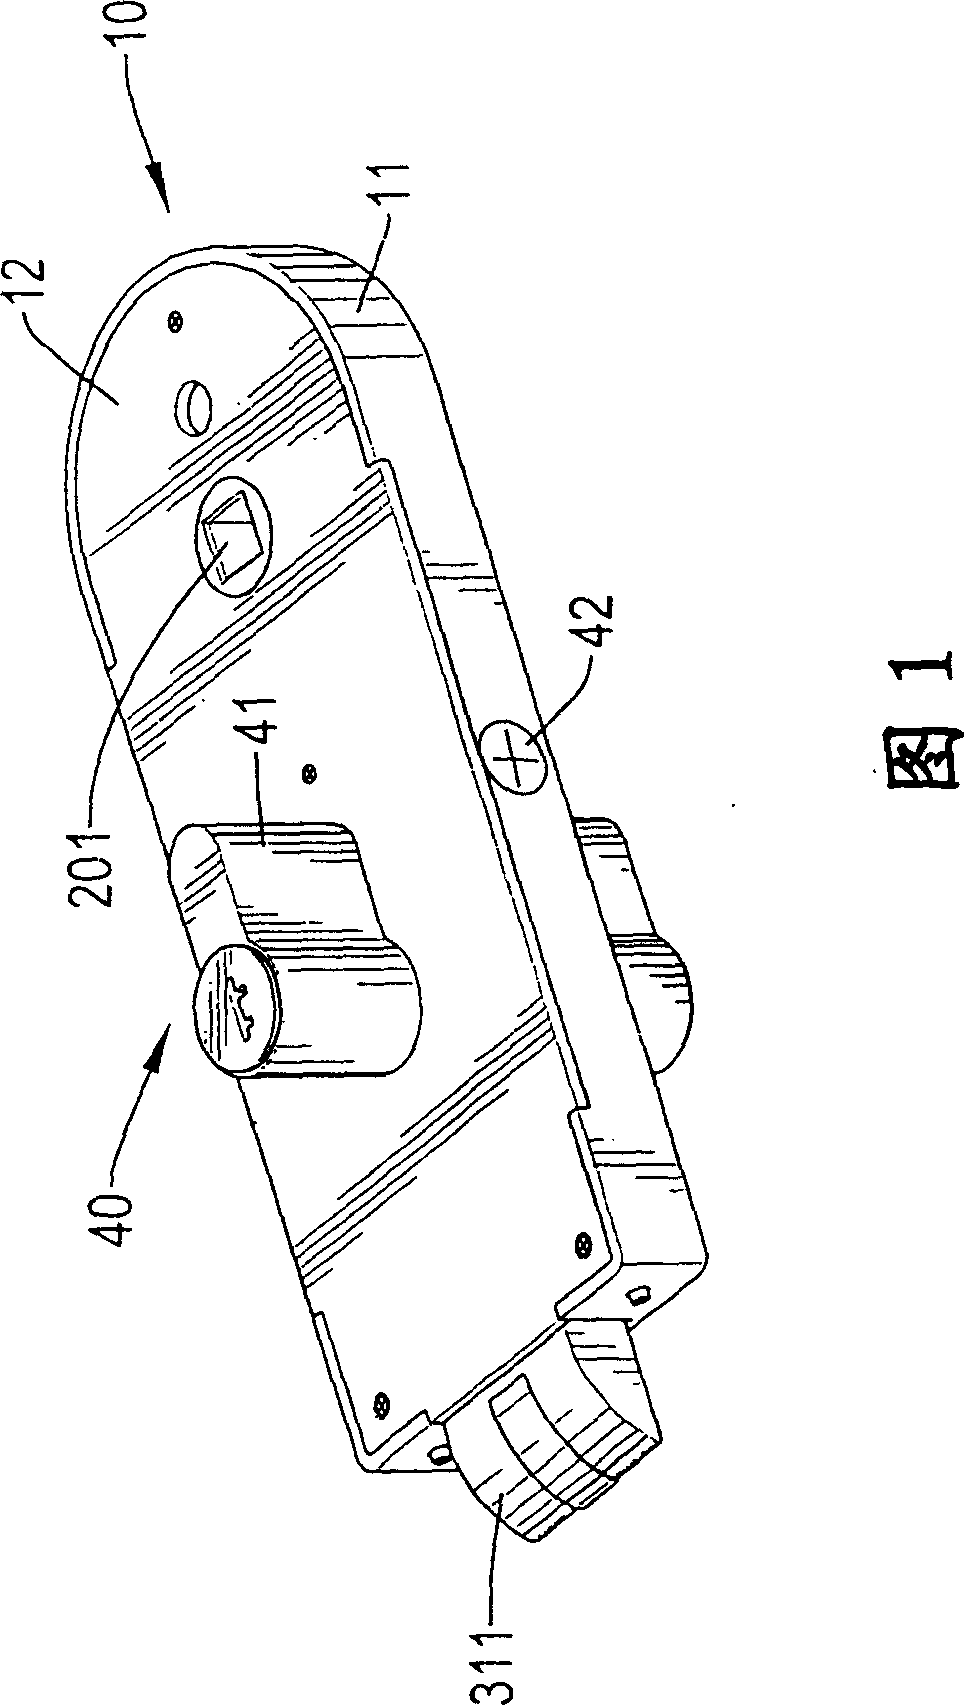 Locking device for non-frame glass door